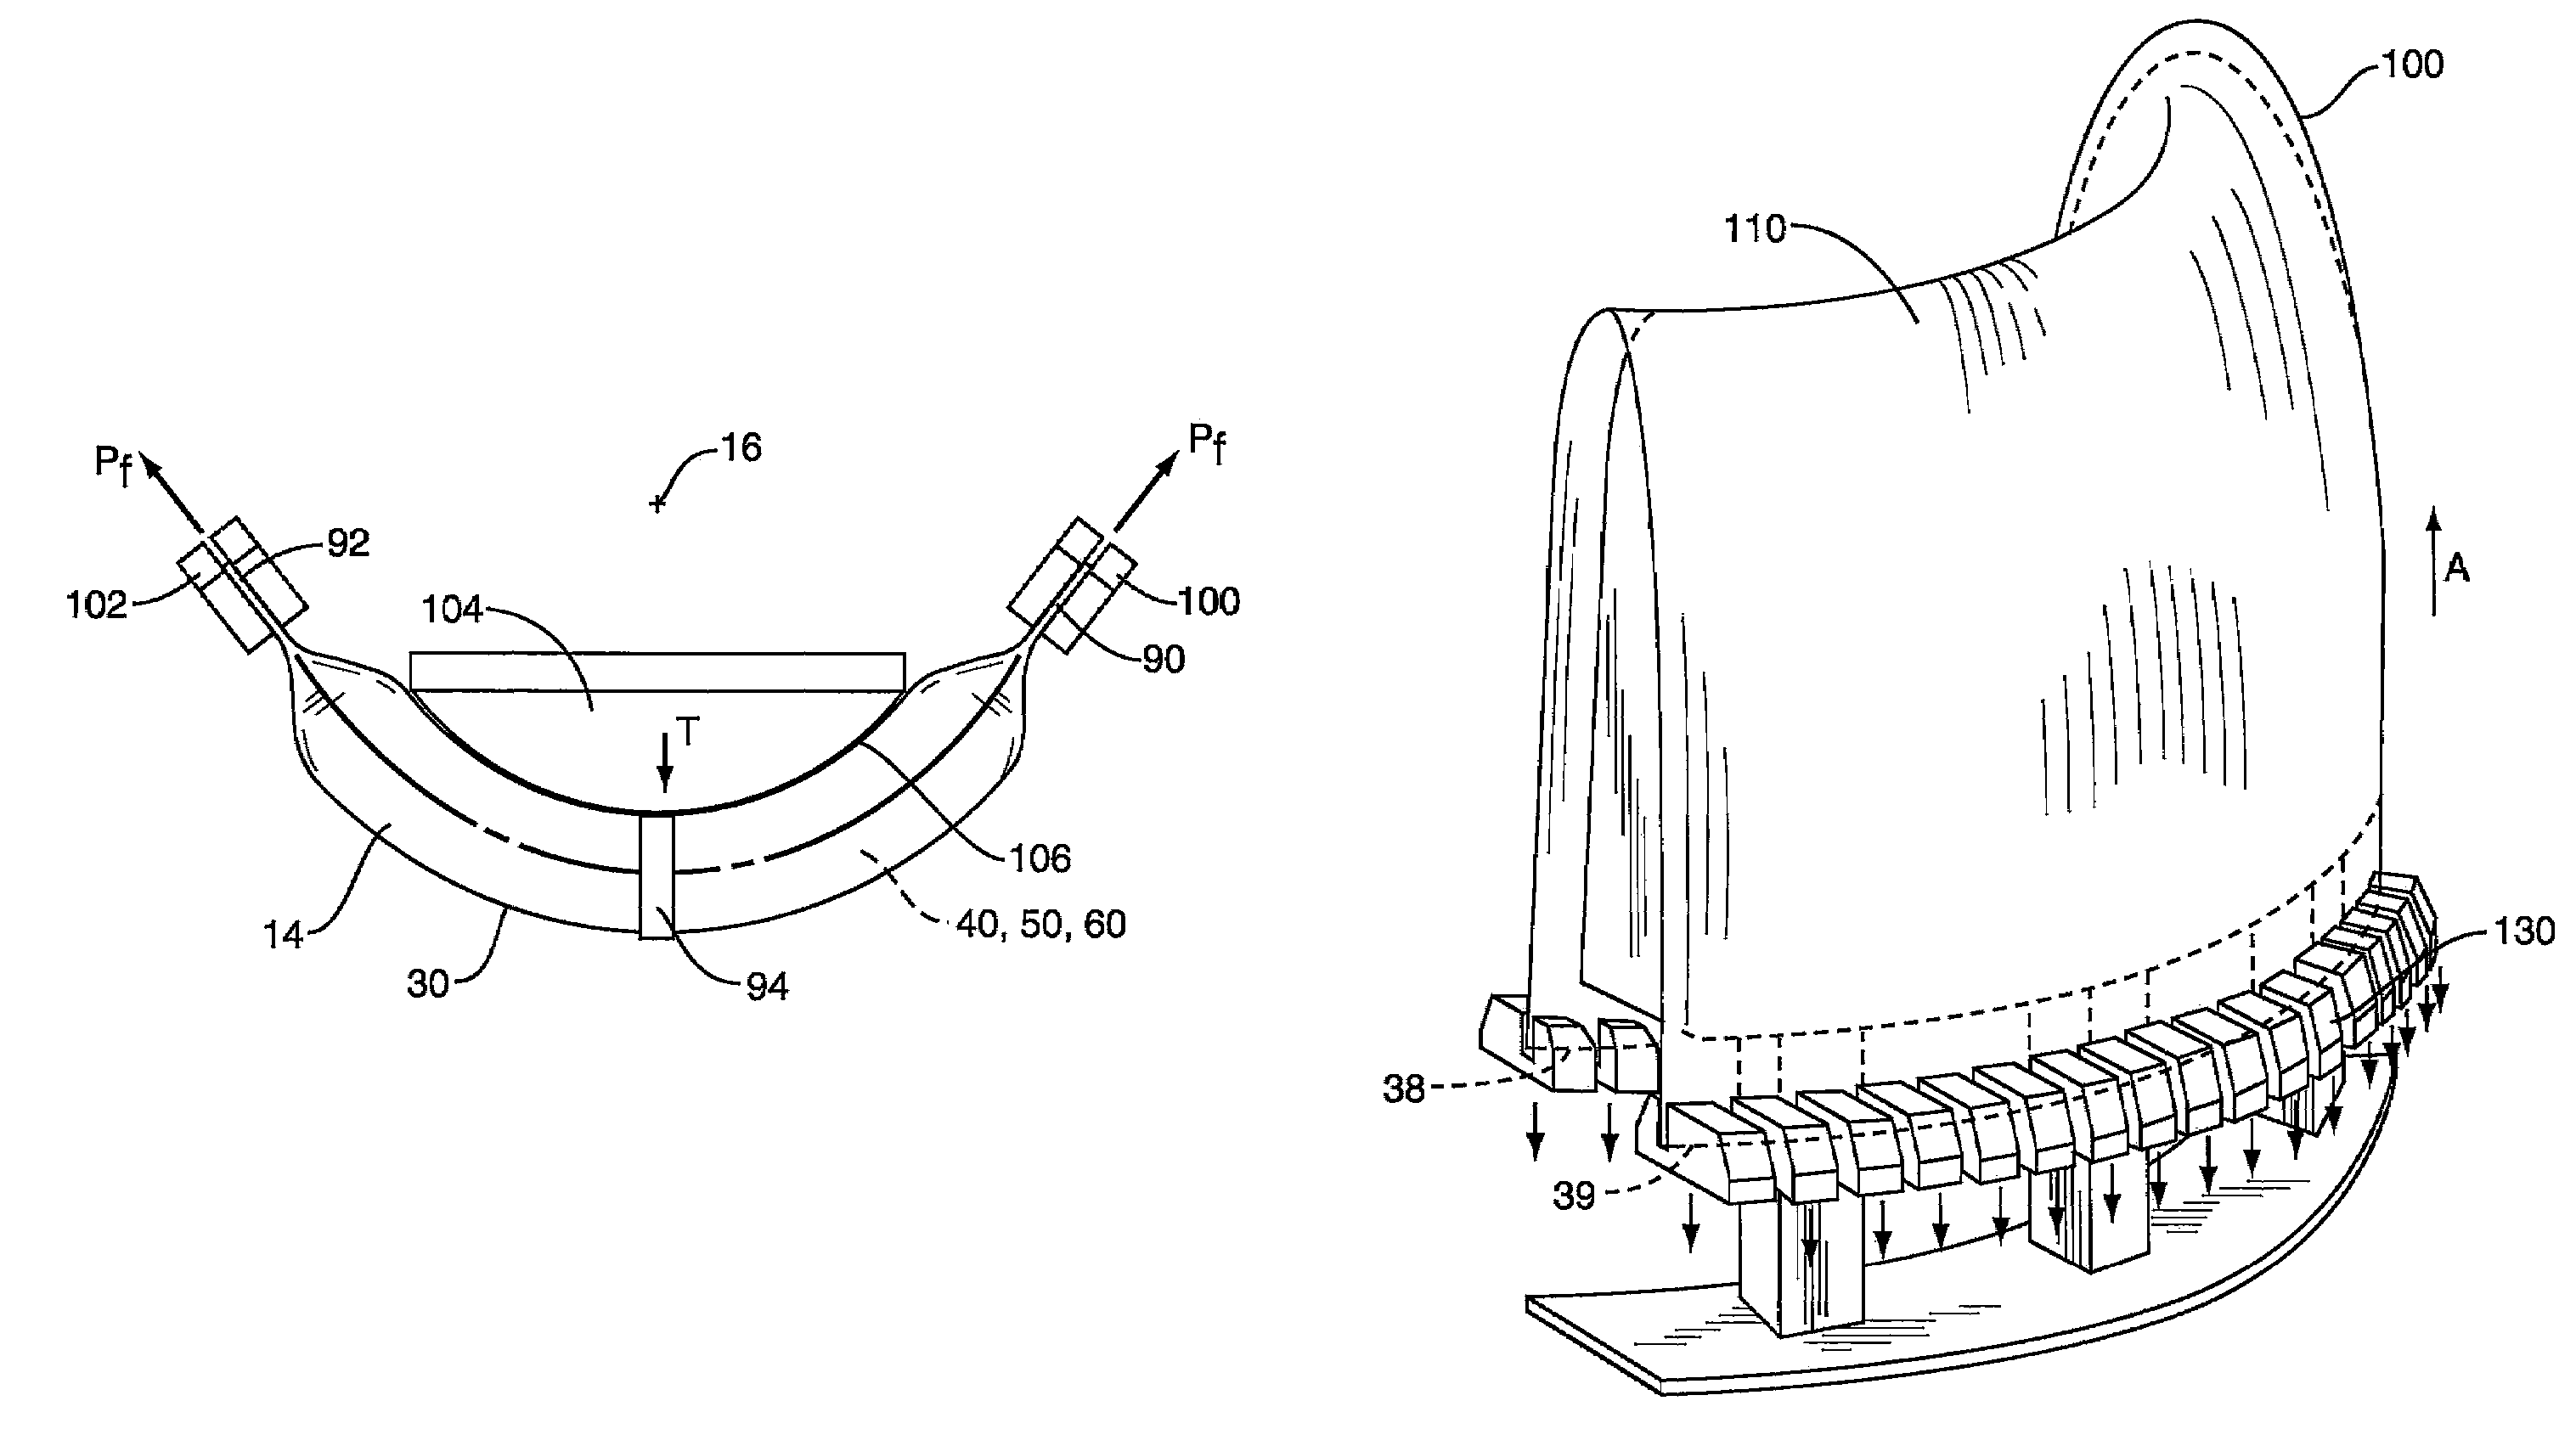 Stretch forming method for a sheet metal skin segment having compound curvatures